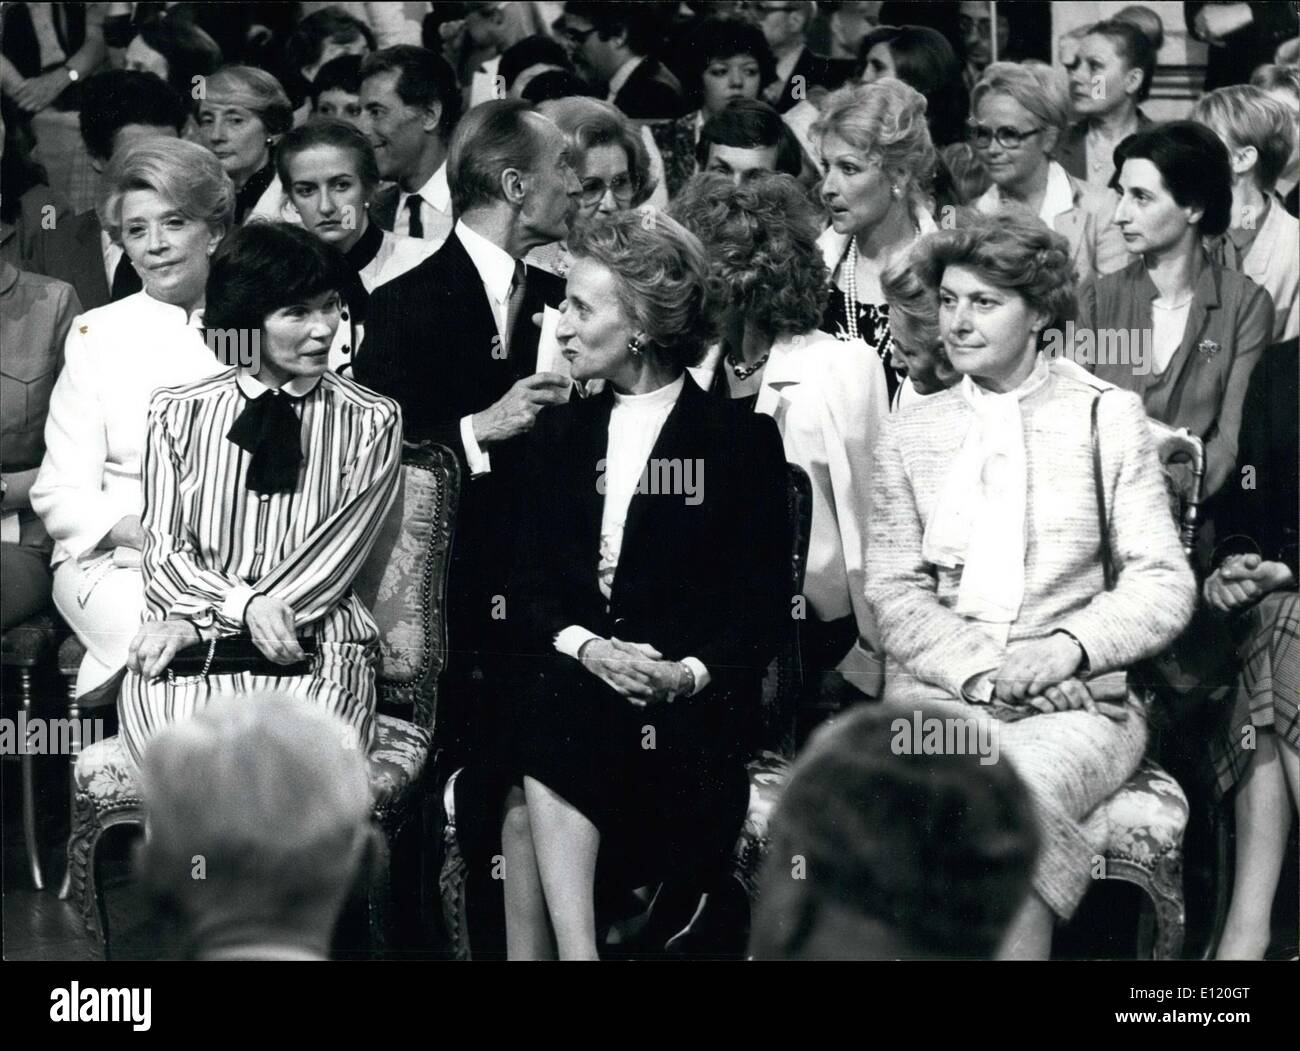 May 22, 1981 - Political wives, left to right: First Lady of France Daniele Mitterand, Bernadette Chirac, wife of the Mayor of Paris, and Mrs. Mauroy, wife of Prime Minister Pierre Mauroy. Stock Photo